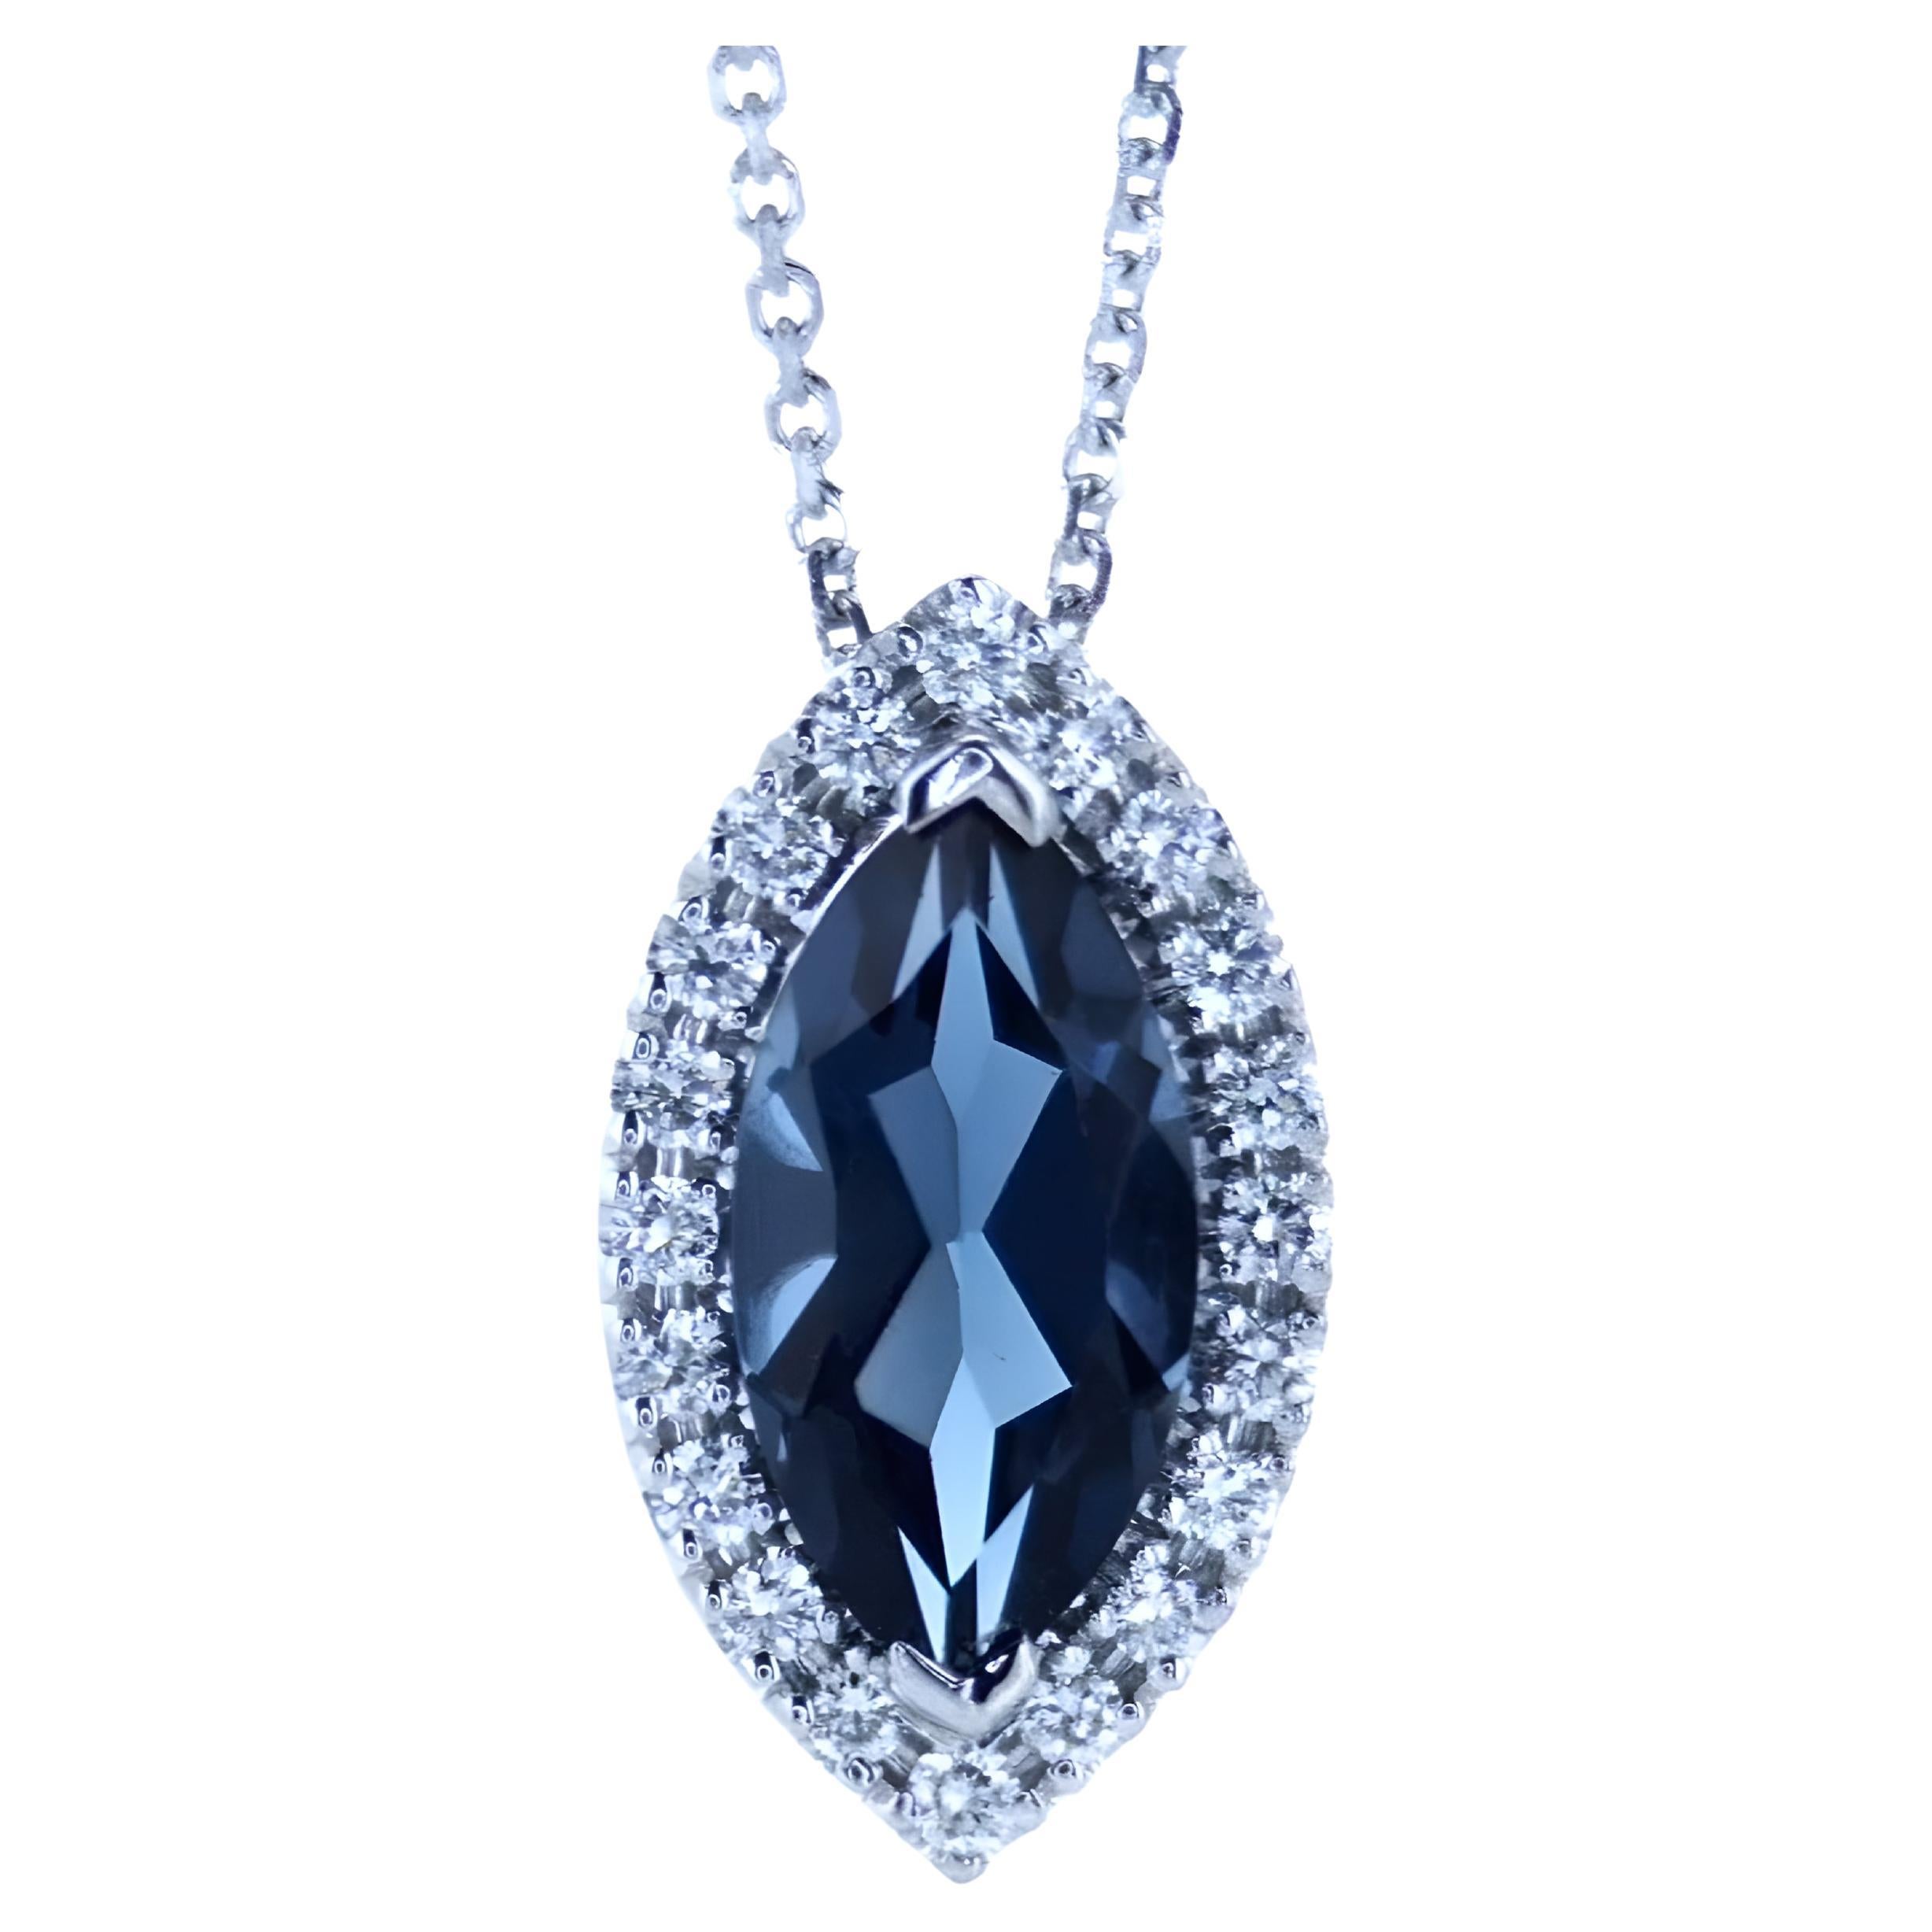 Is Blue Topaz expensive?